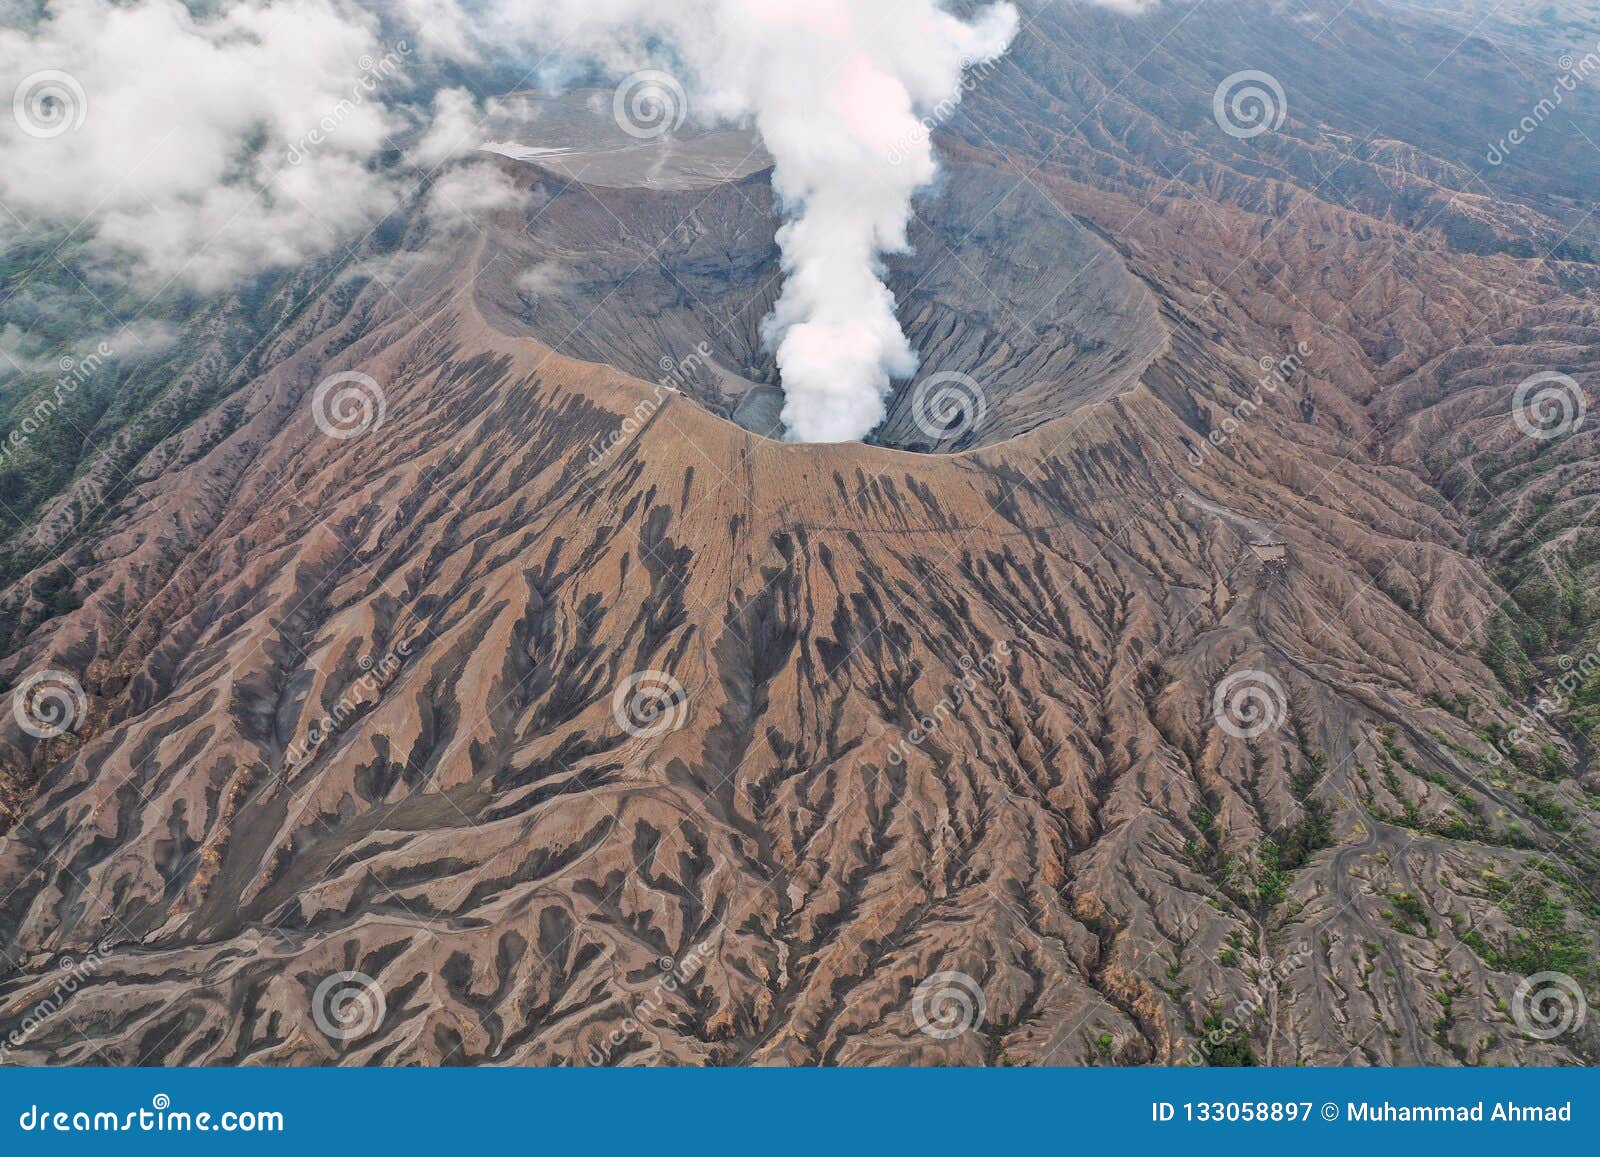 Volcanic Crater, Mount Bromo, East Java Stock Image - Image of mountain